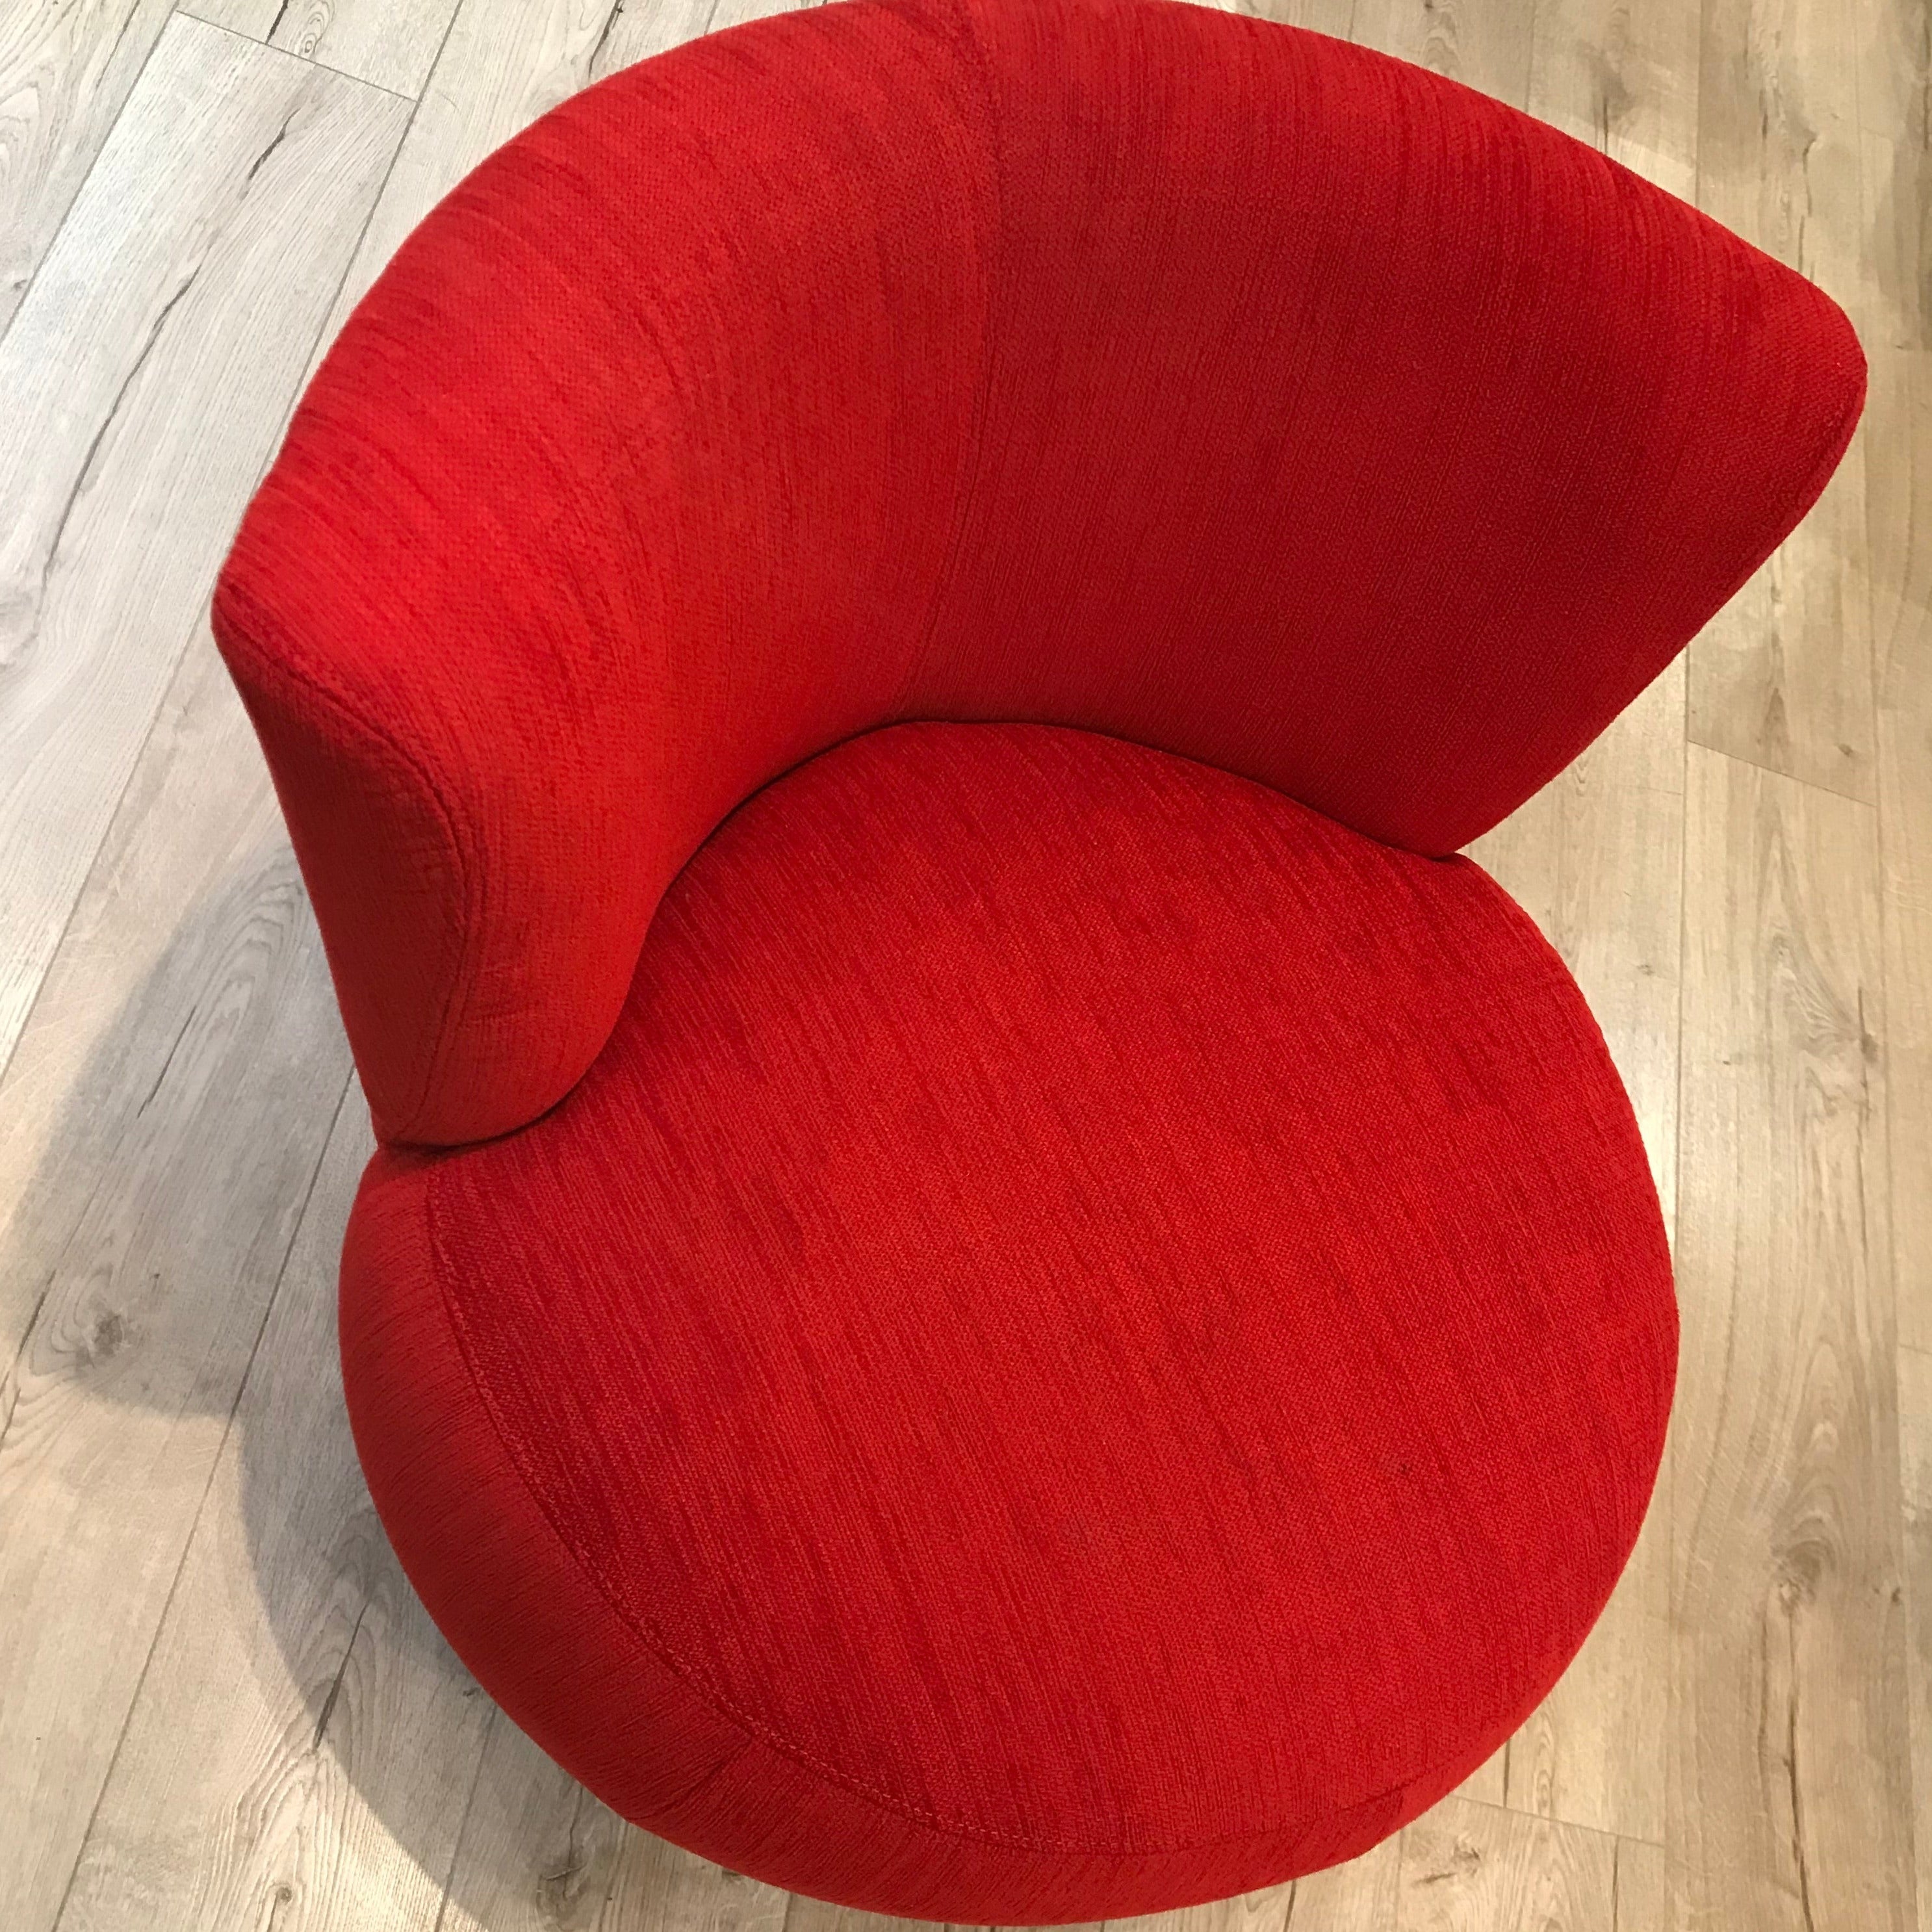 Red Boss Chair - The Nancy Smillie Shop - Art, Jewellery & Designer Gifts Glasgow